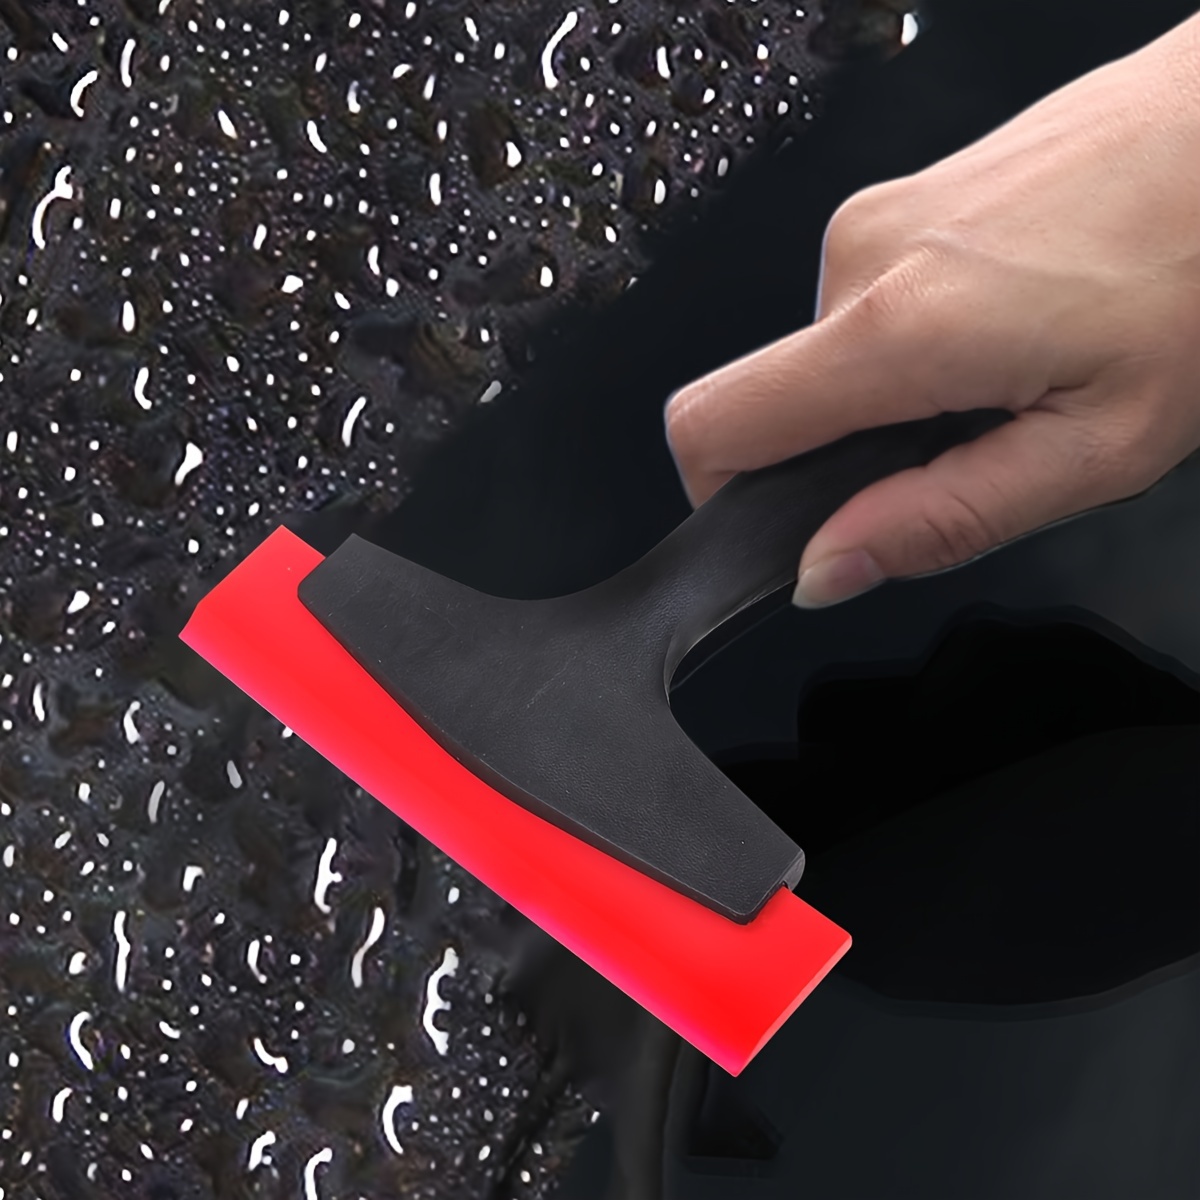 Rubber squeegee with comfortable handle